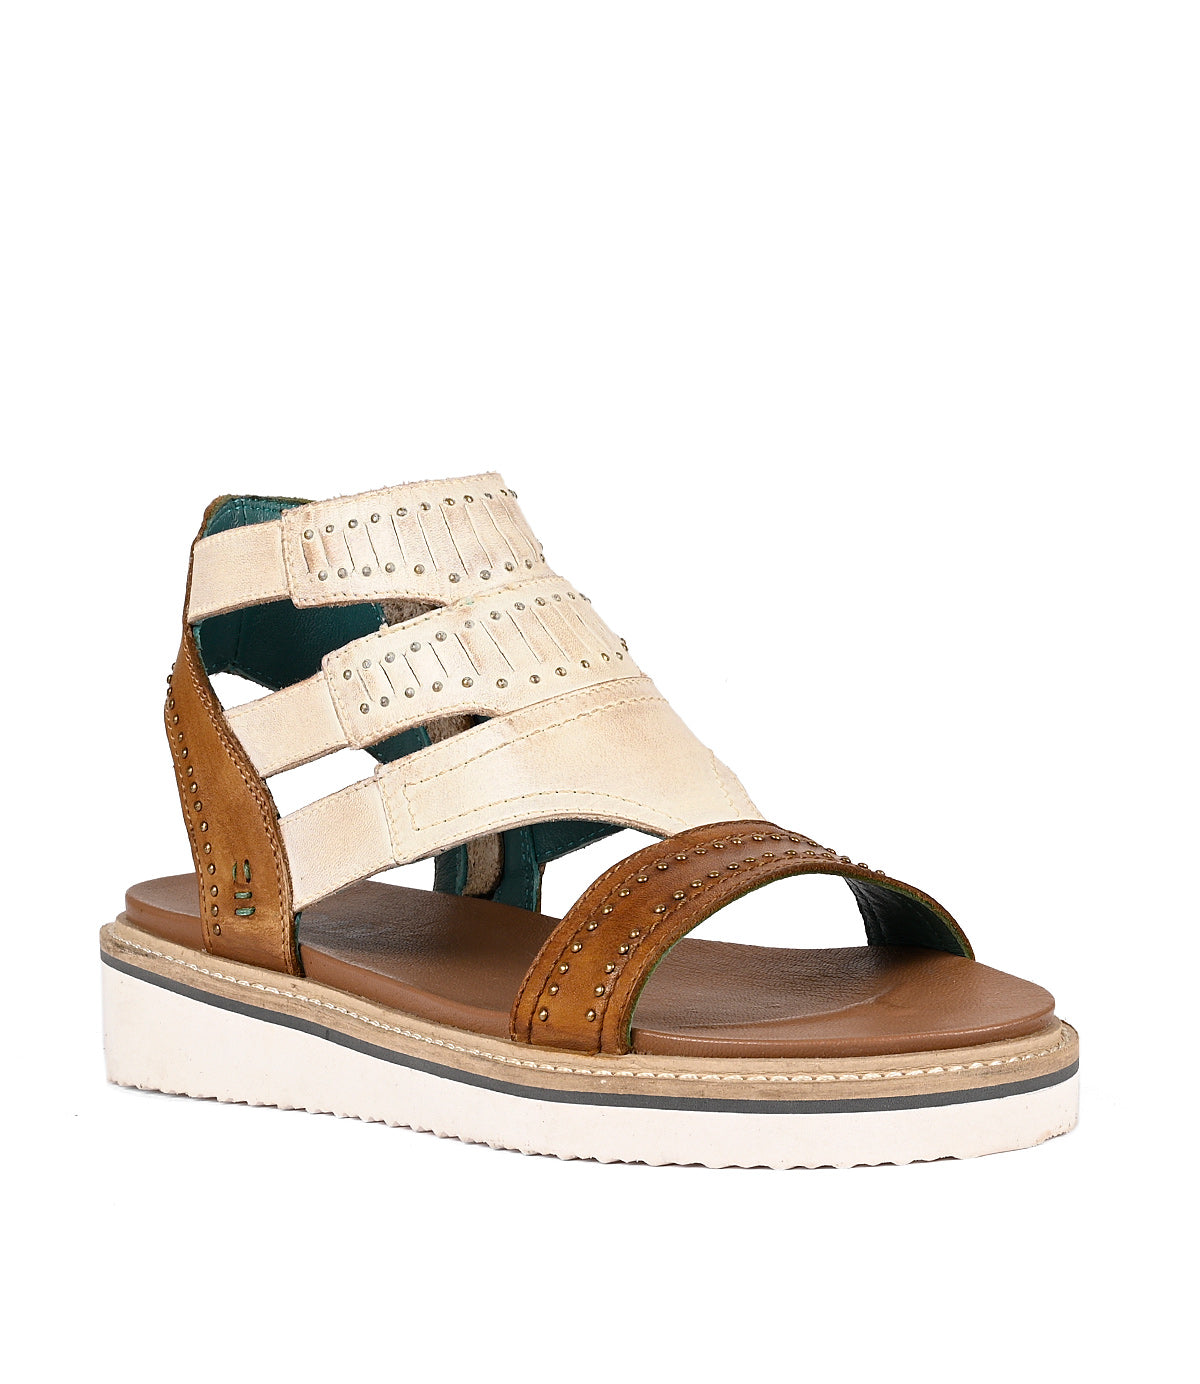 Women's Roan Carlita II multi-textured strappy wedge sandal in full-grain leather on a white background.